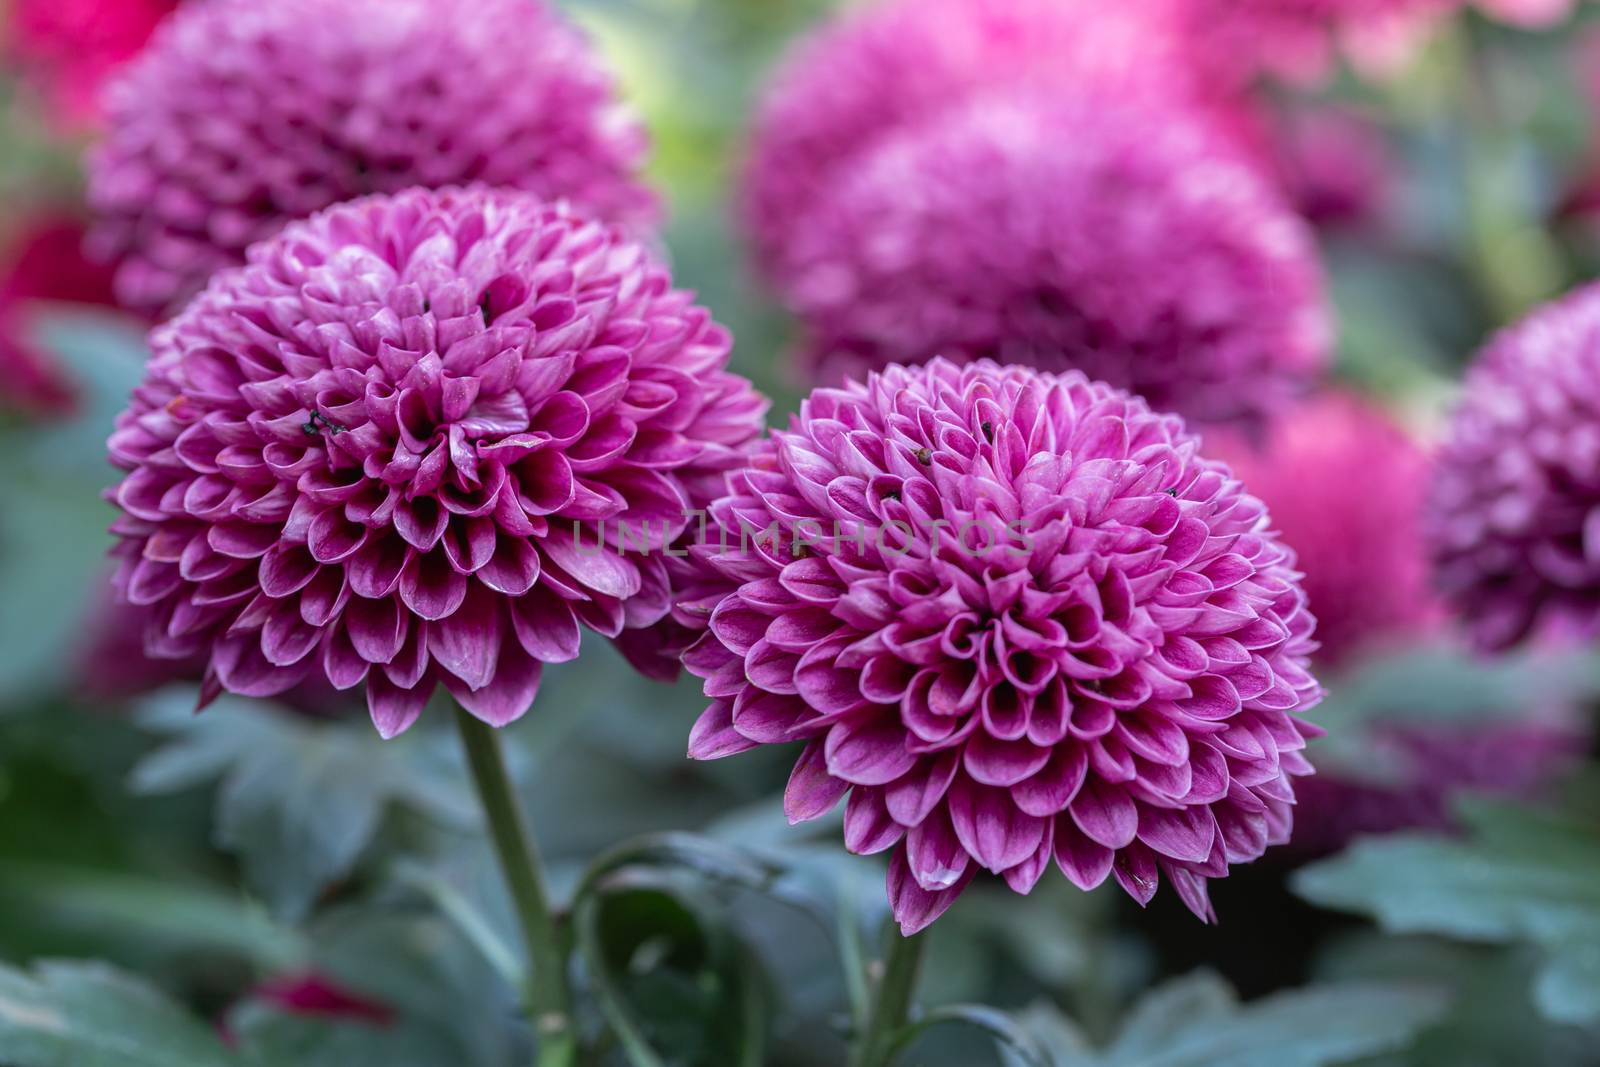 Pompom chrysanthemums flower in garden at sunny summer or spring day for decoration and agriculture design.